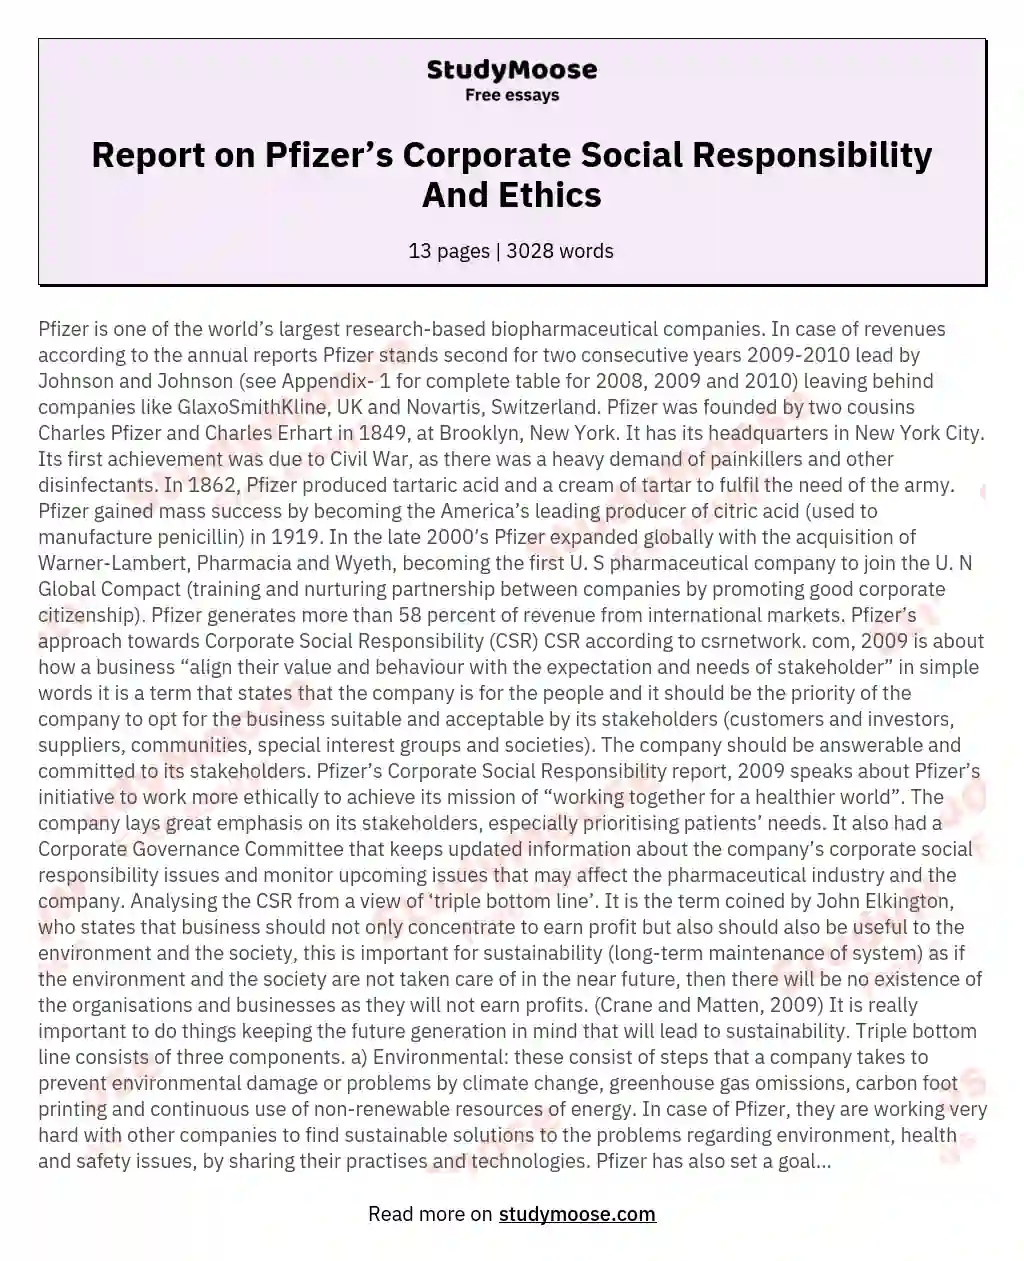 Report on Pfizer’s Corporate Social Responsibility And Ethics